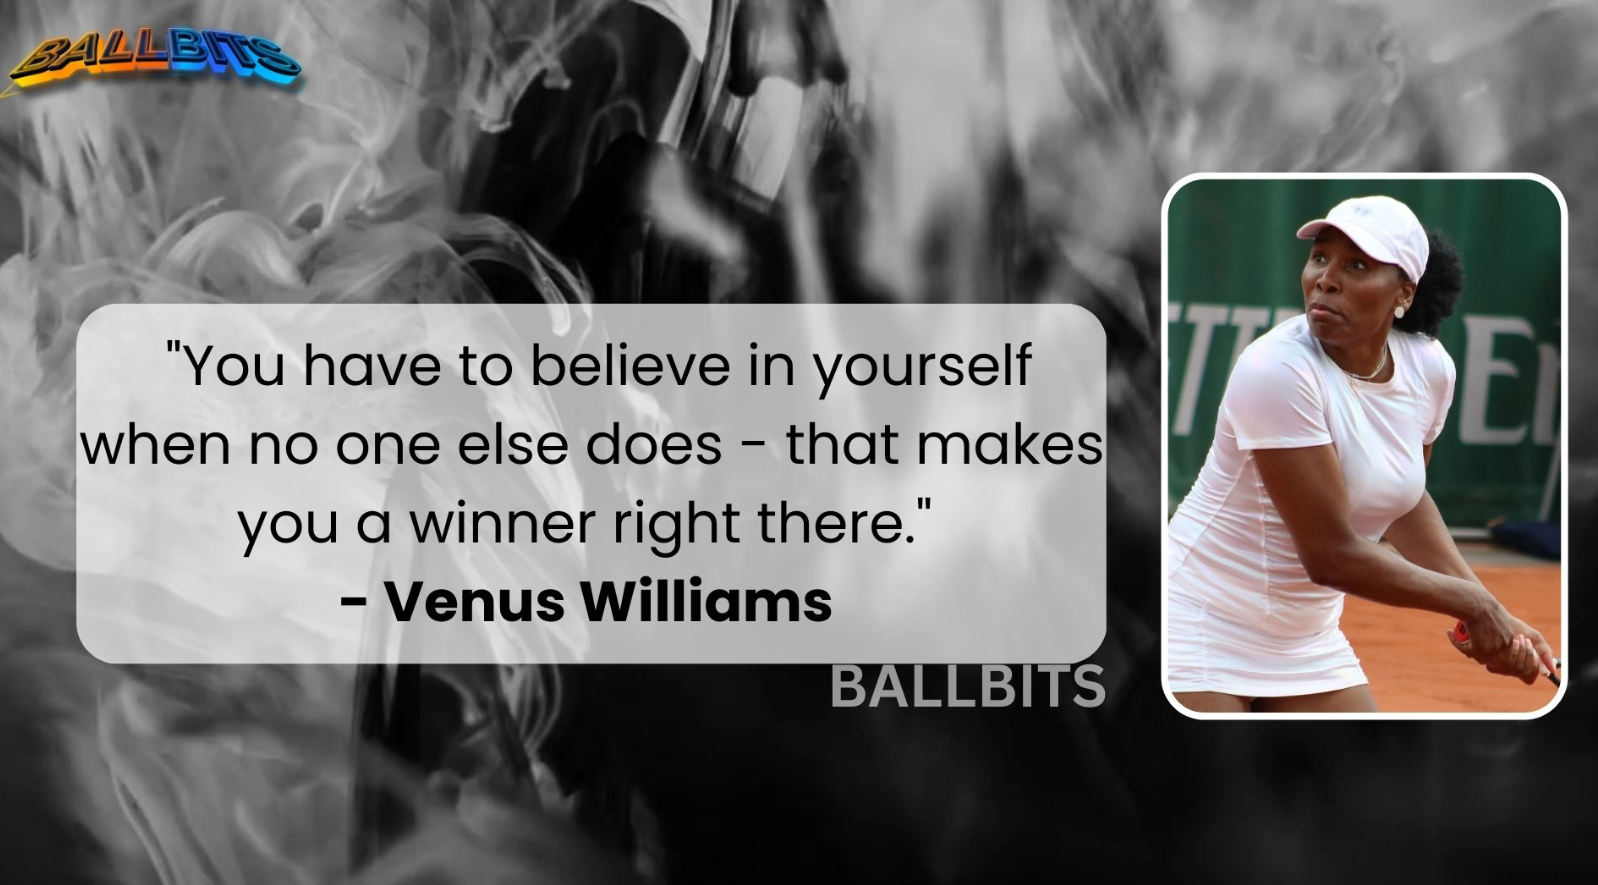 "You have to believe in yourself when no one else does - that makes you a winner right there." - Venus Williams 